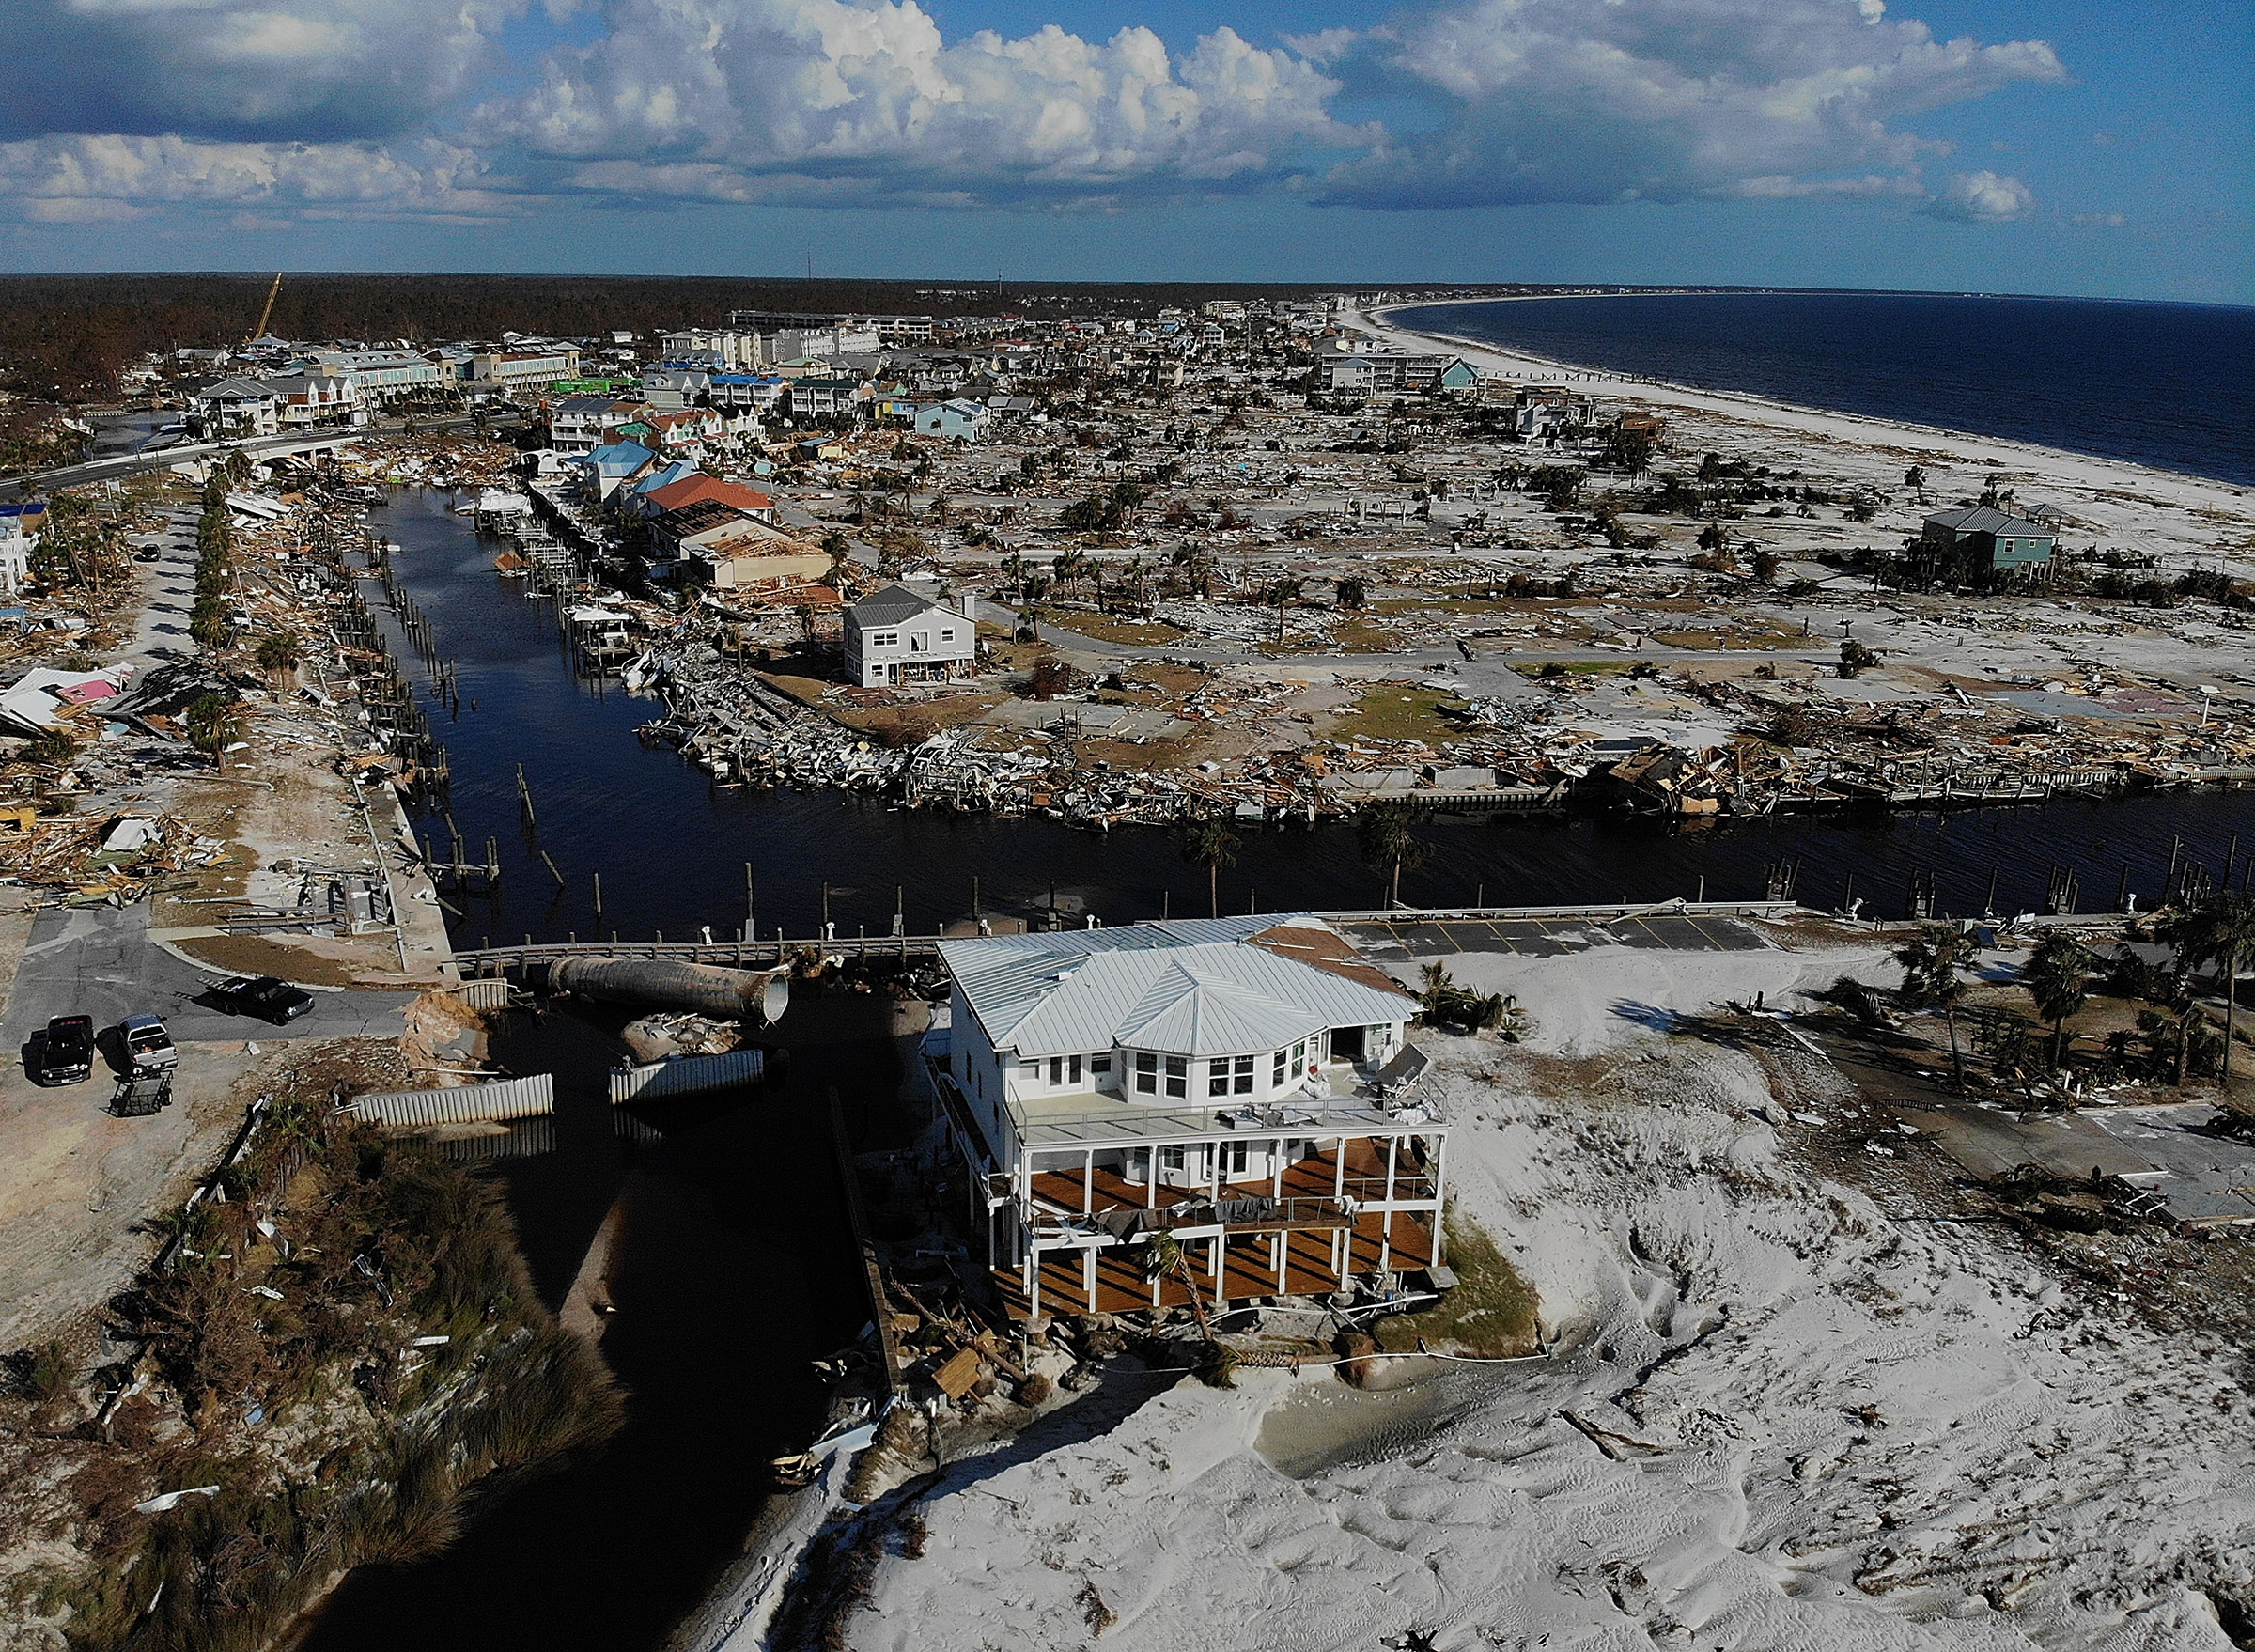 The aftermath of Hurricane Michael, which made a catastrophic landfall as a Category 5 hurricane near Mexico Beach, Fla., in October 2018. (Joe Raedle—Getty Images)